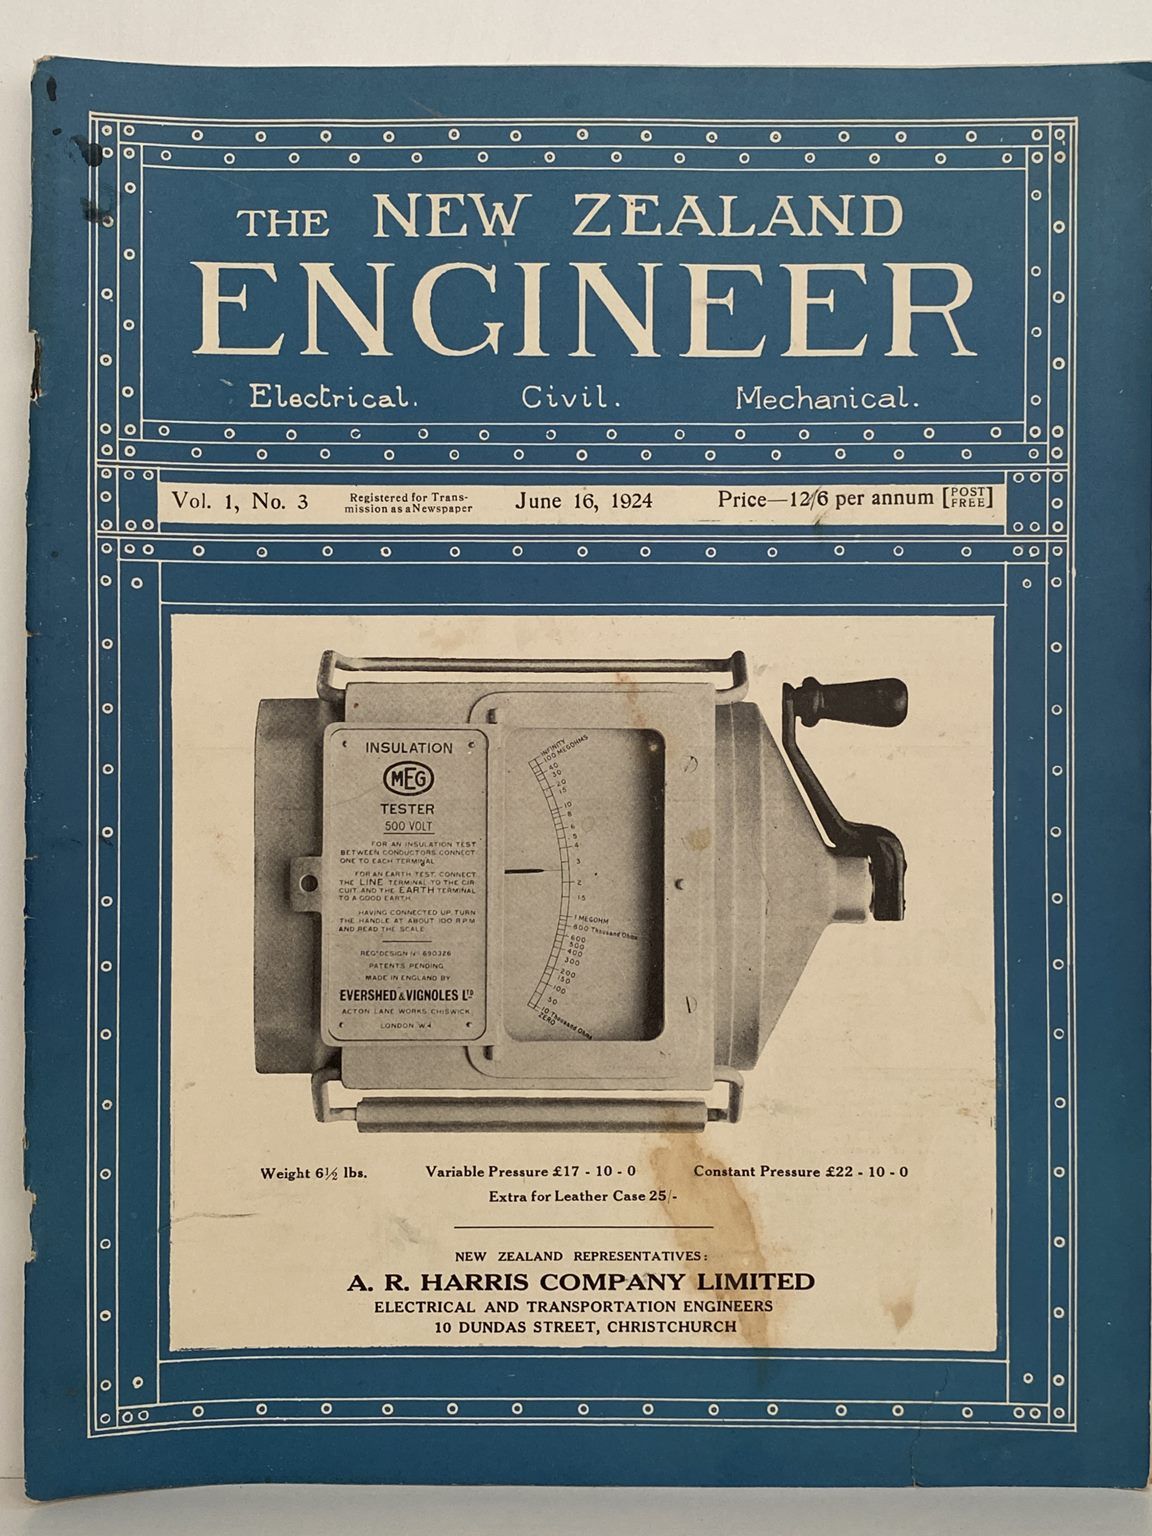 OLD MAGAZINE: The New Zealand Engineer Vol. 1, No. 3 - 16 June 1924